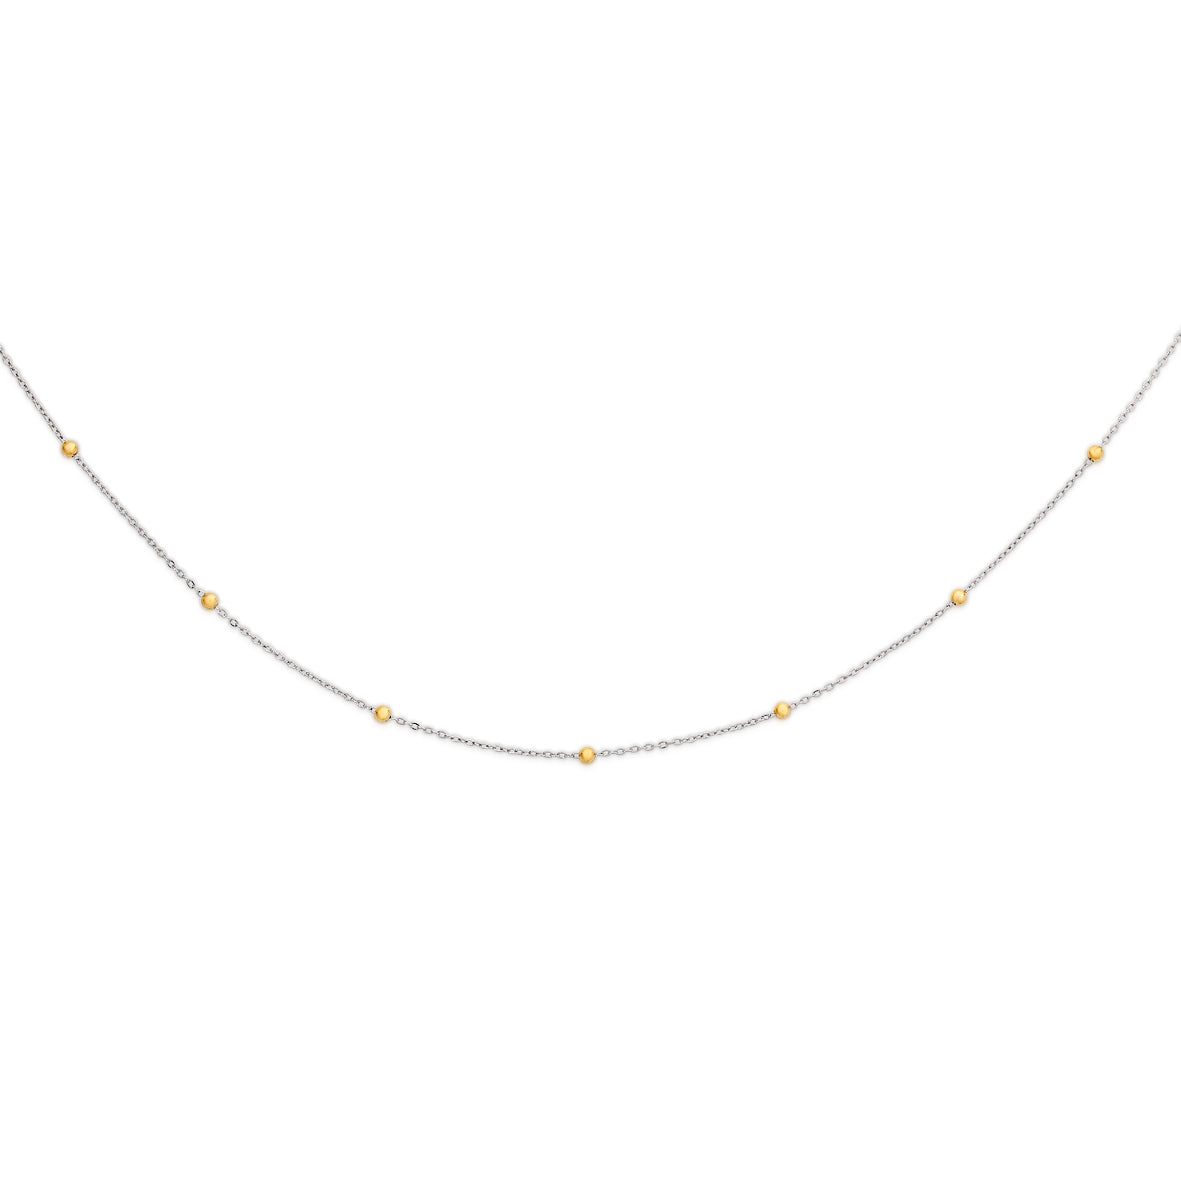 9ct white & yellow gold ball necklet